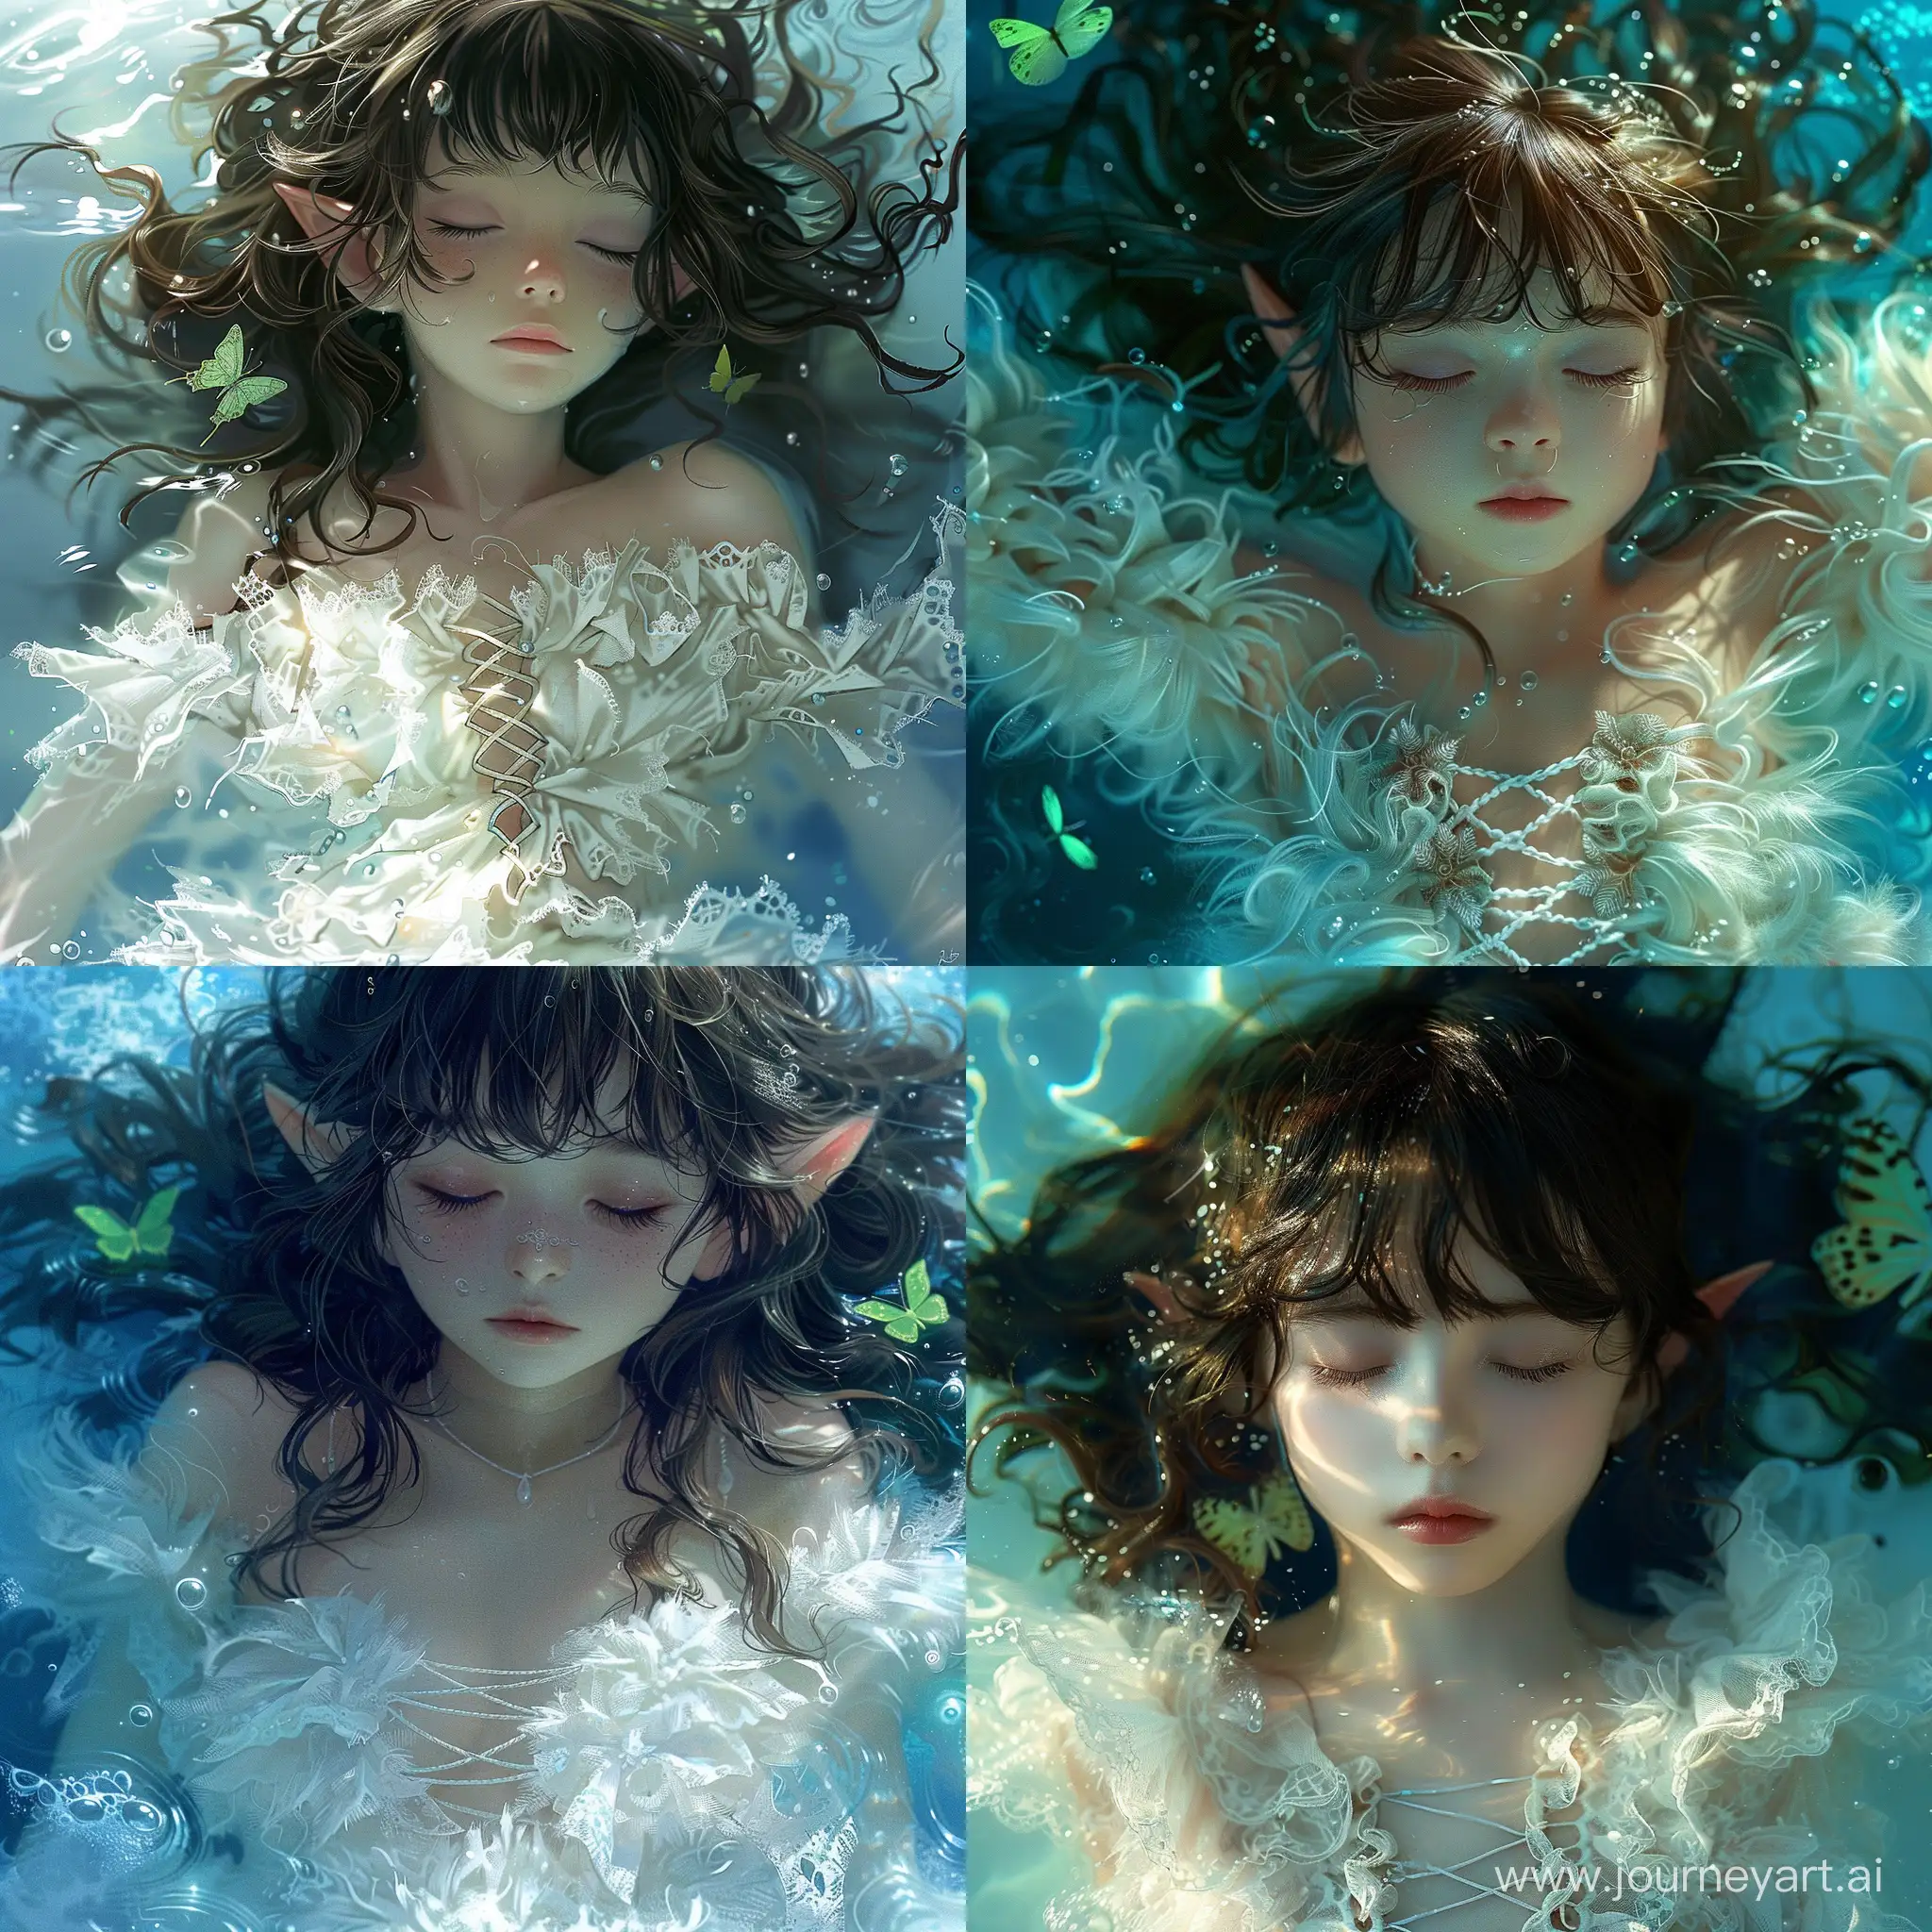 Dreamy-Elf-Girl-Resting-in-Tranquil-Waters-Surrounded-by-Green-Butterflies